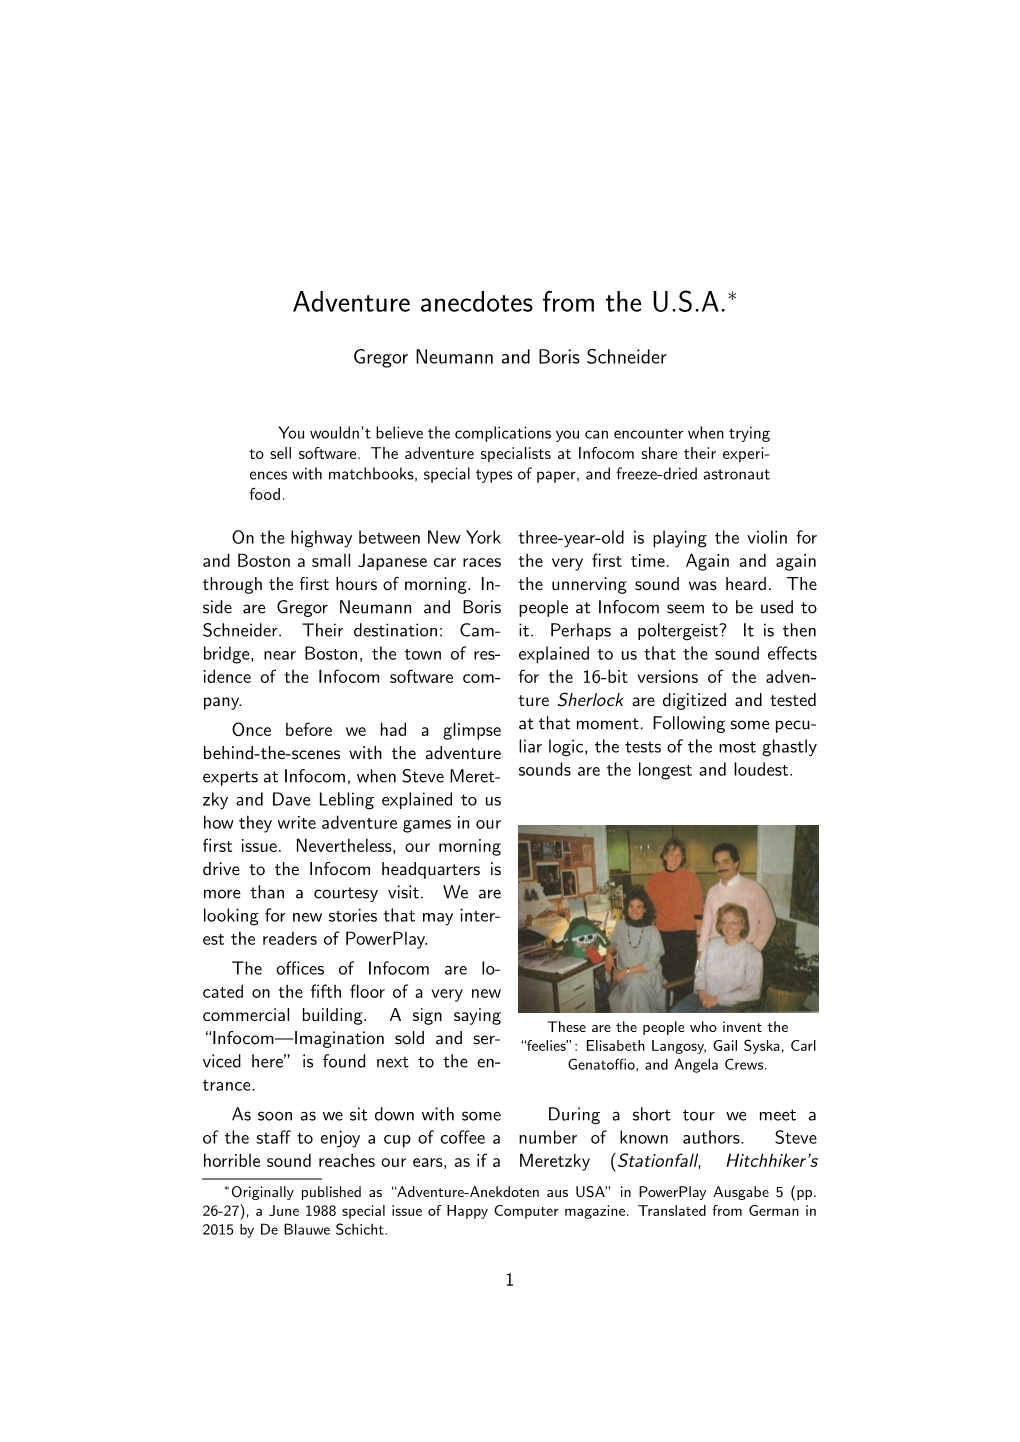 Adventure Anecdotes from the U.S.A. (Pdf)